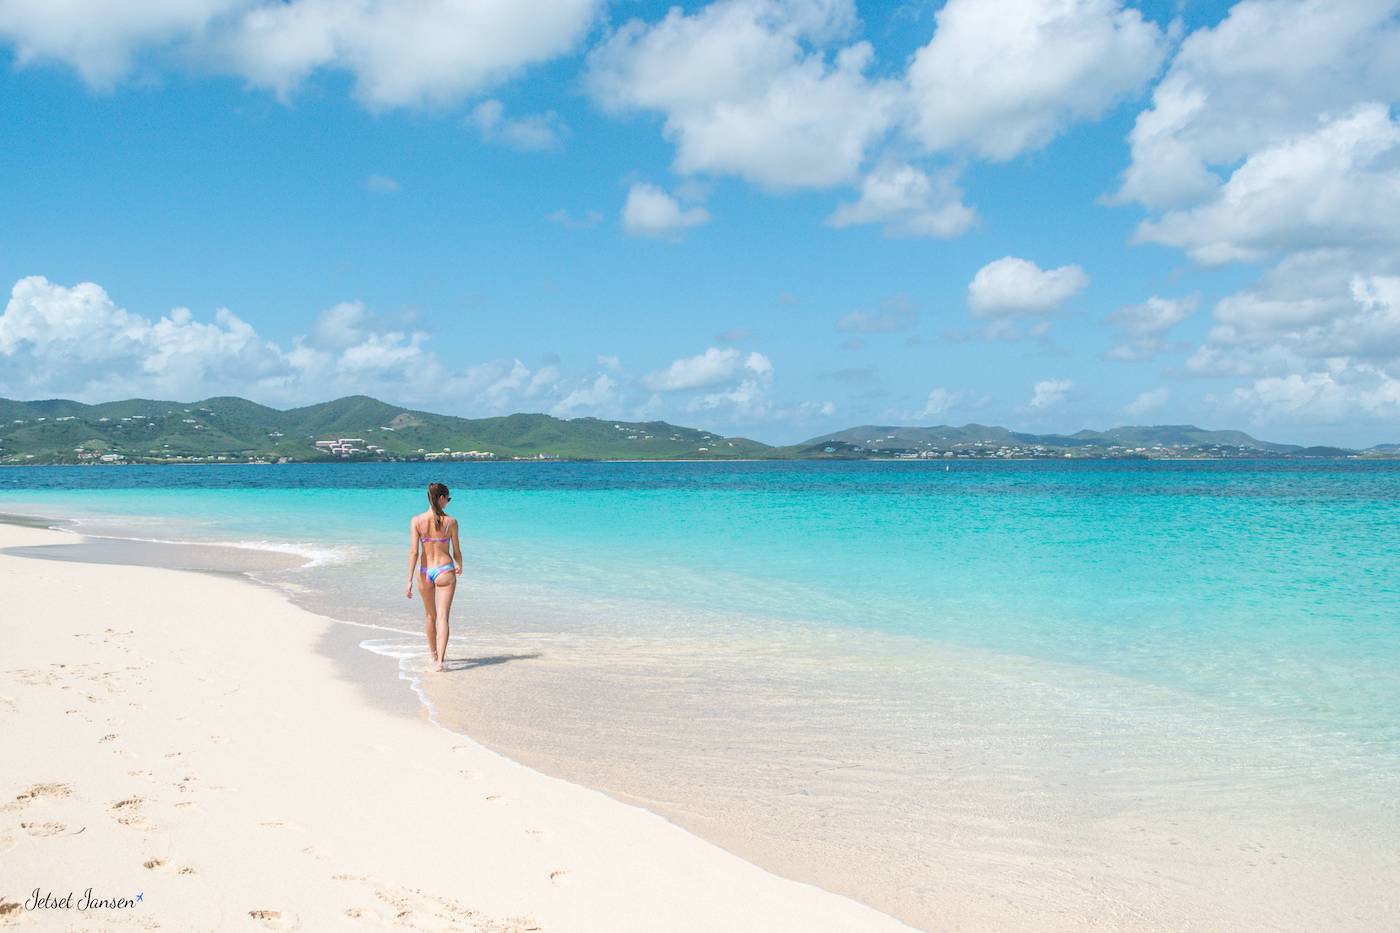 20 Best Things to Do in St. Croix